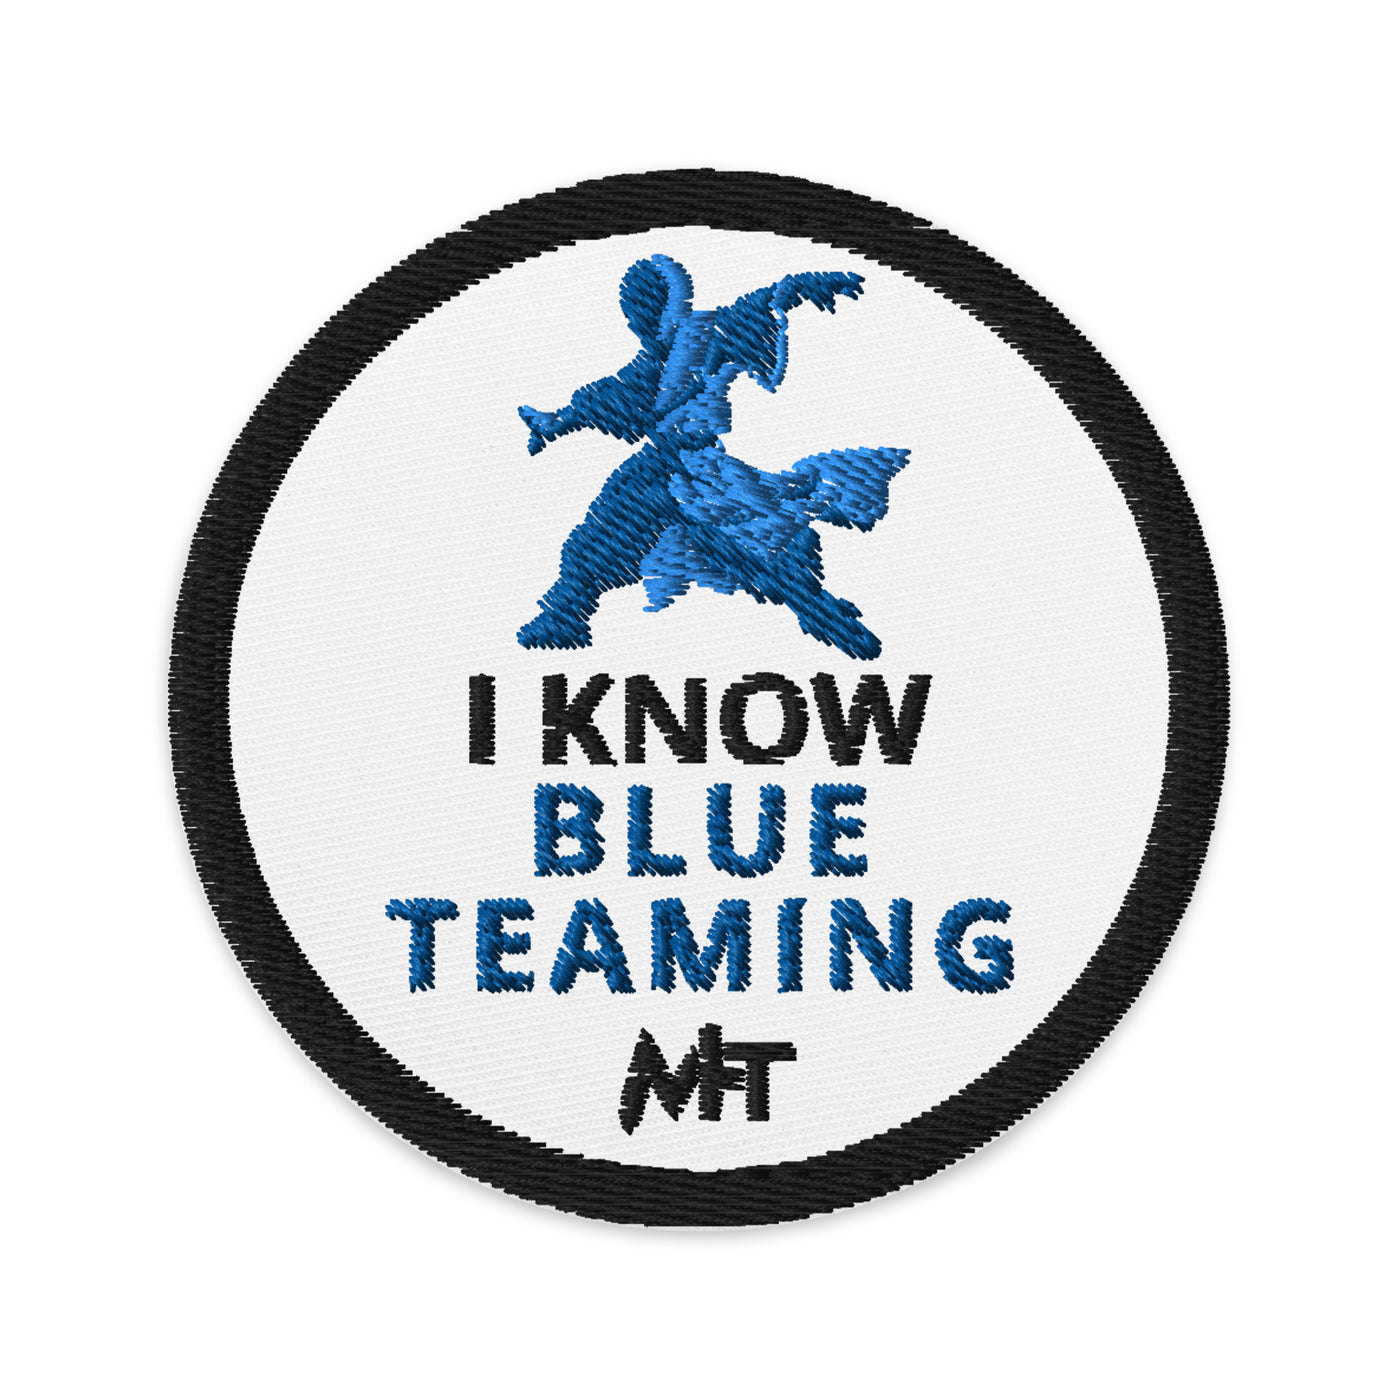 I Know Blue Teaming - Embroidered patches